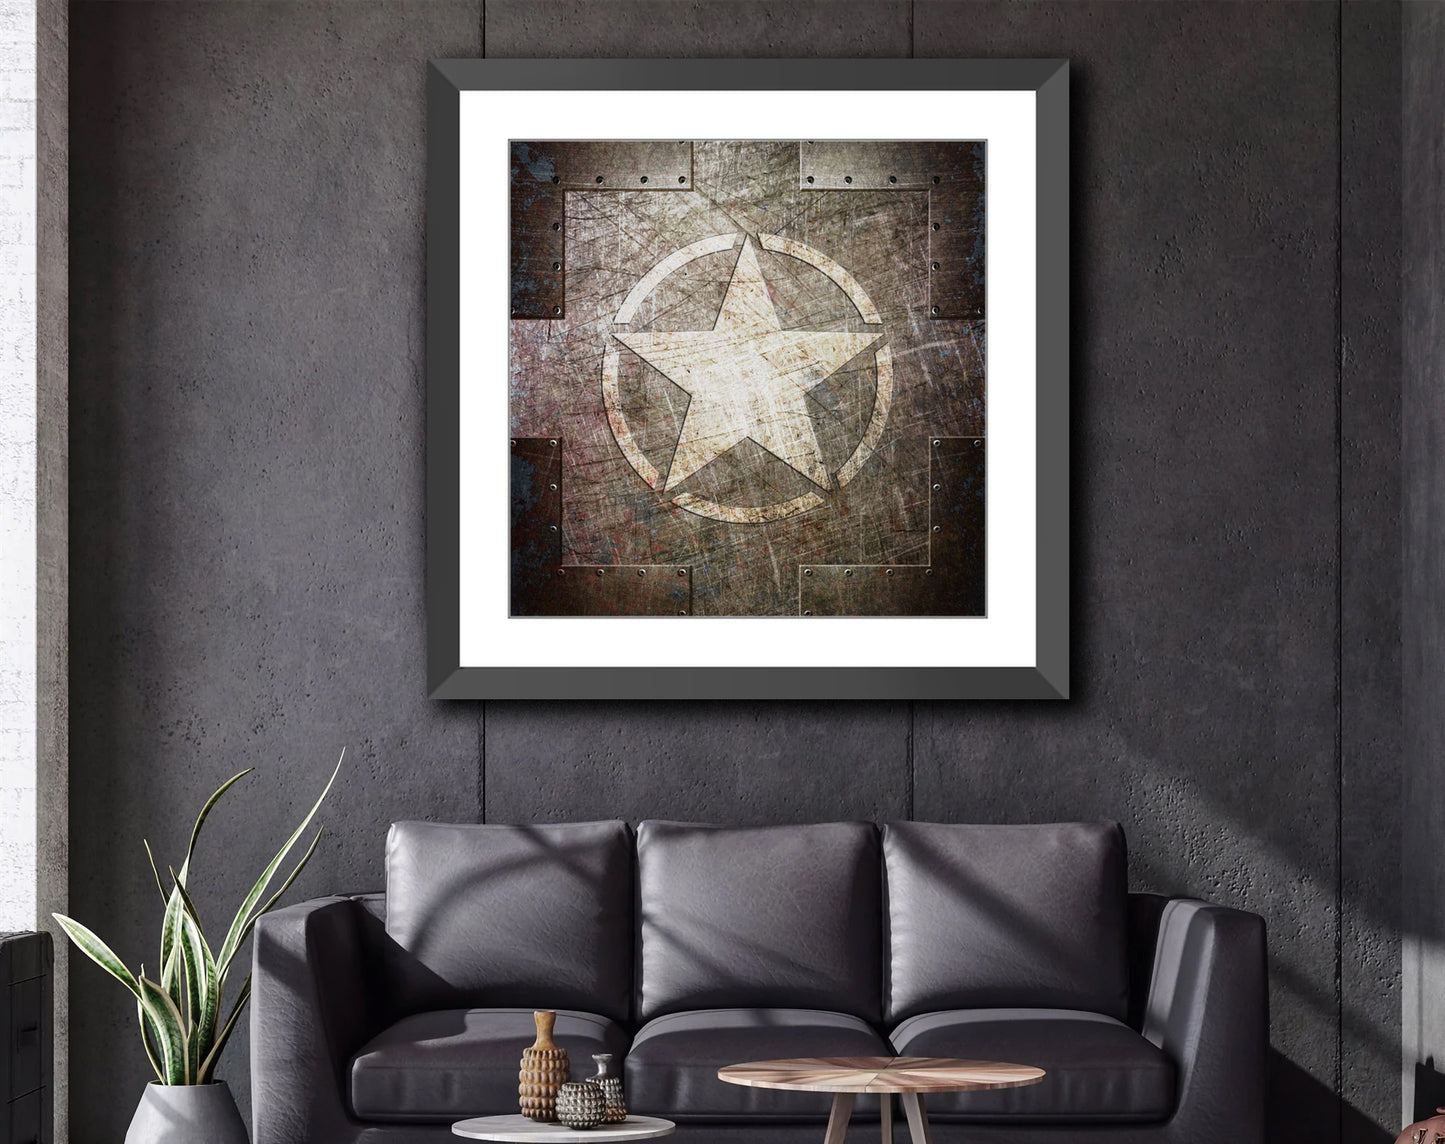 Army Themed Wall Framed Print - Army Star Print on Archival Paper in a Black Color Wood Frame